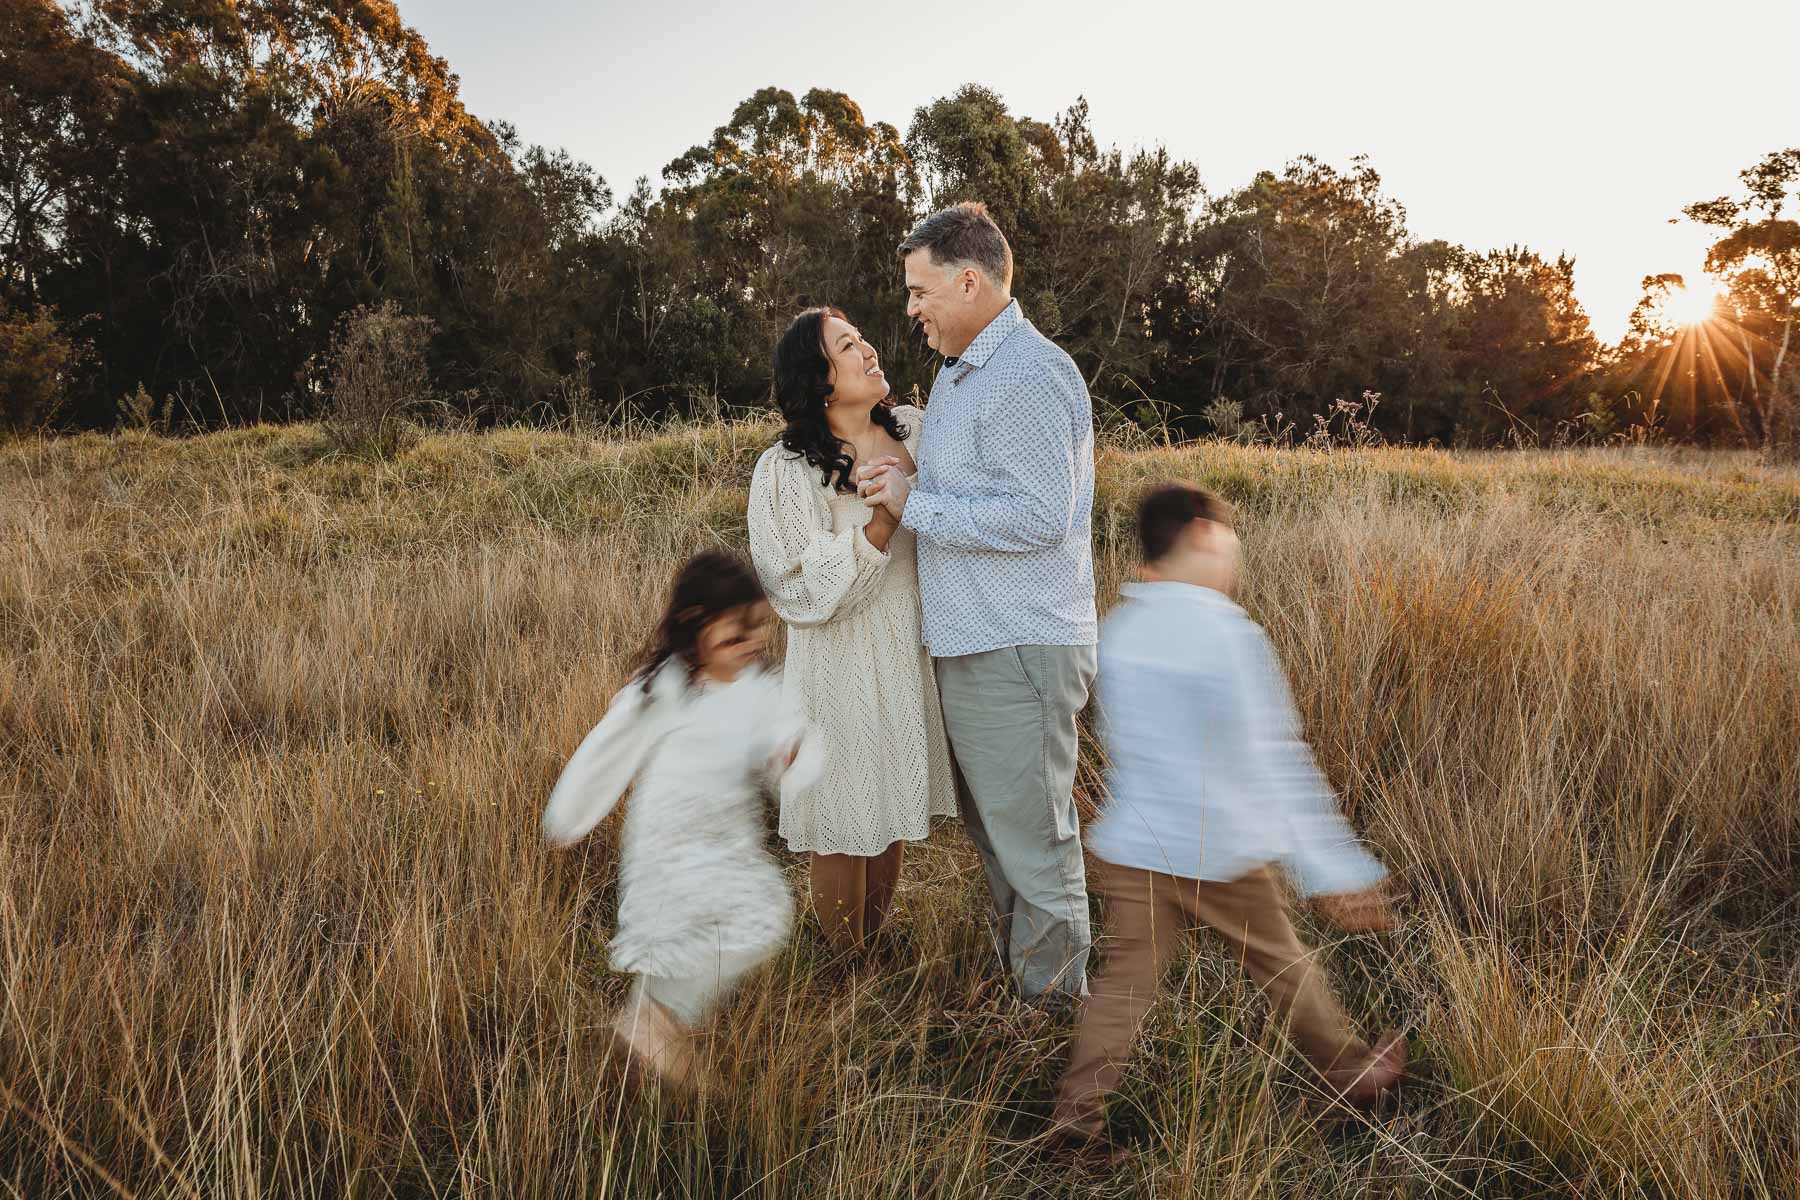 Parents stand in a grassy field as their kids run around them at sunset during their family photo session